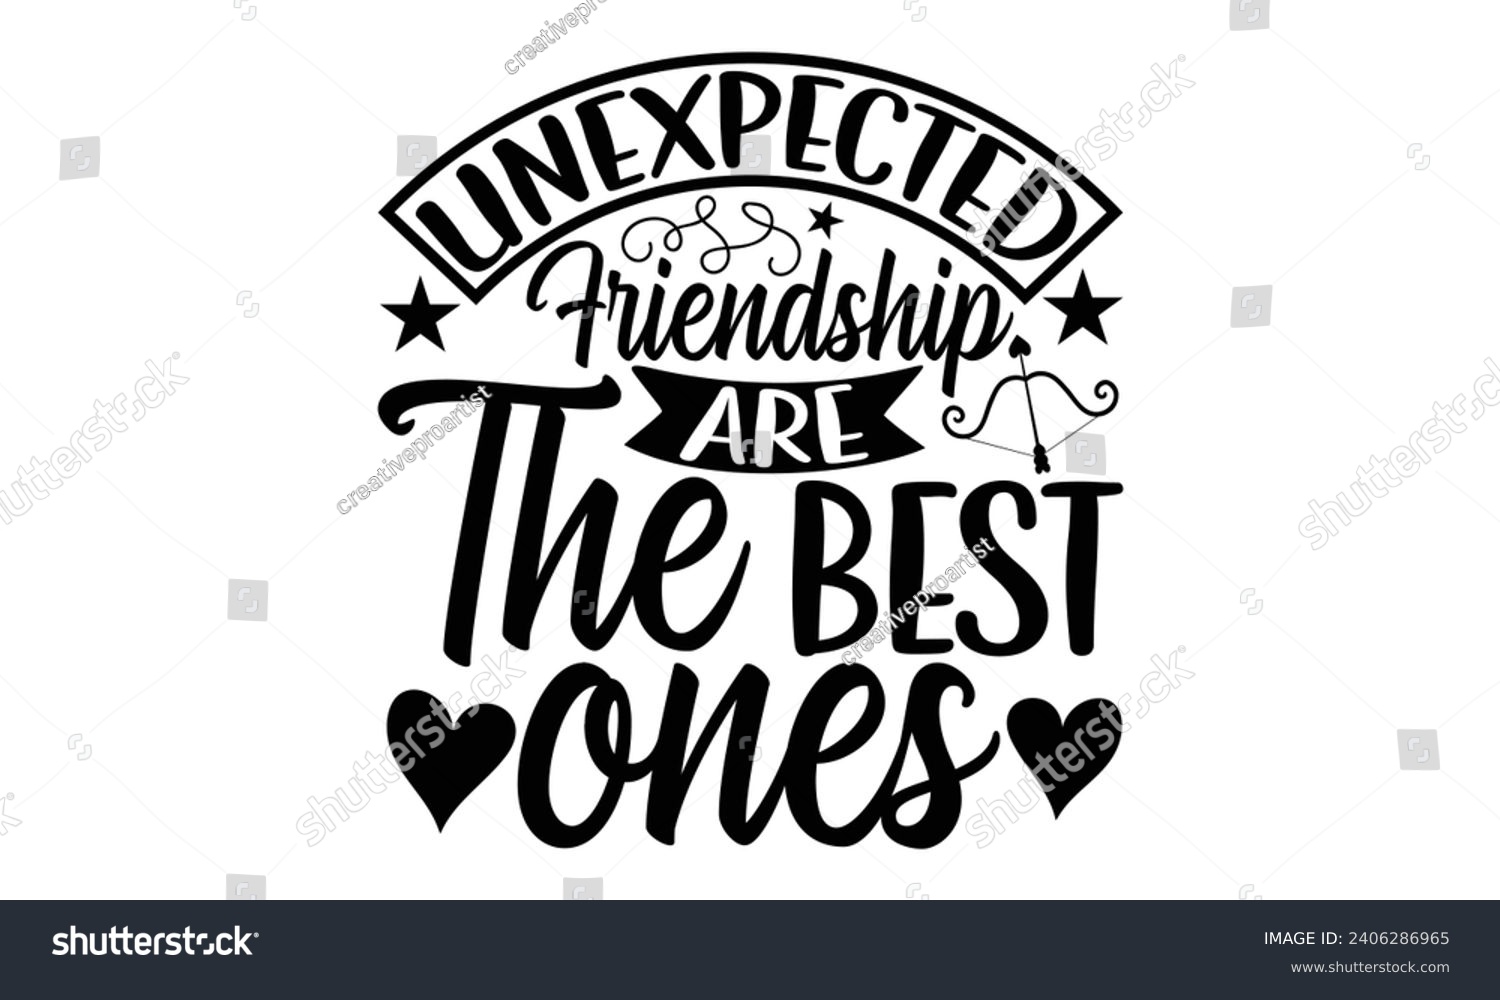 SVG of Unexpected Friendship Are The Best Ones- Best friends t- shirt design, Hand drawn vintage illustration with hand-lettering and decoration elements, greeting card template with typography text svg